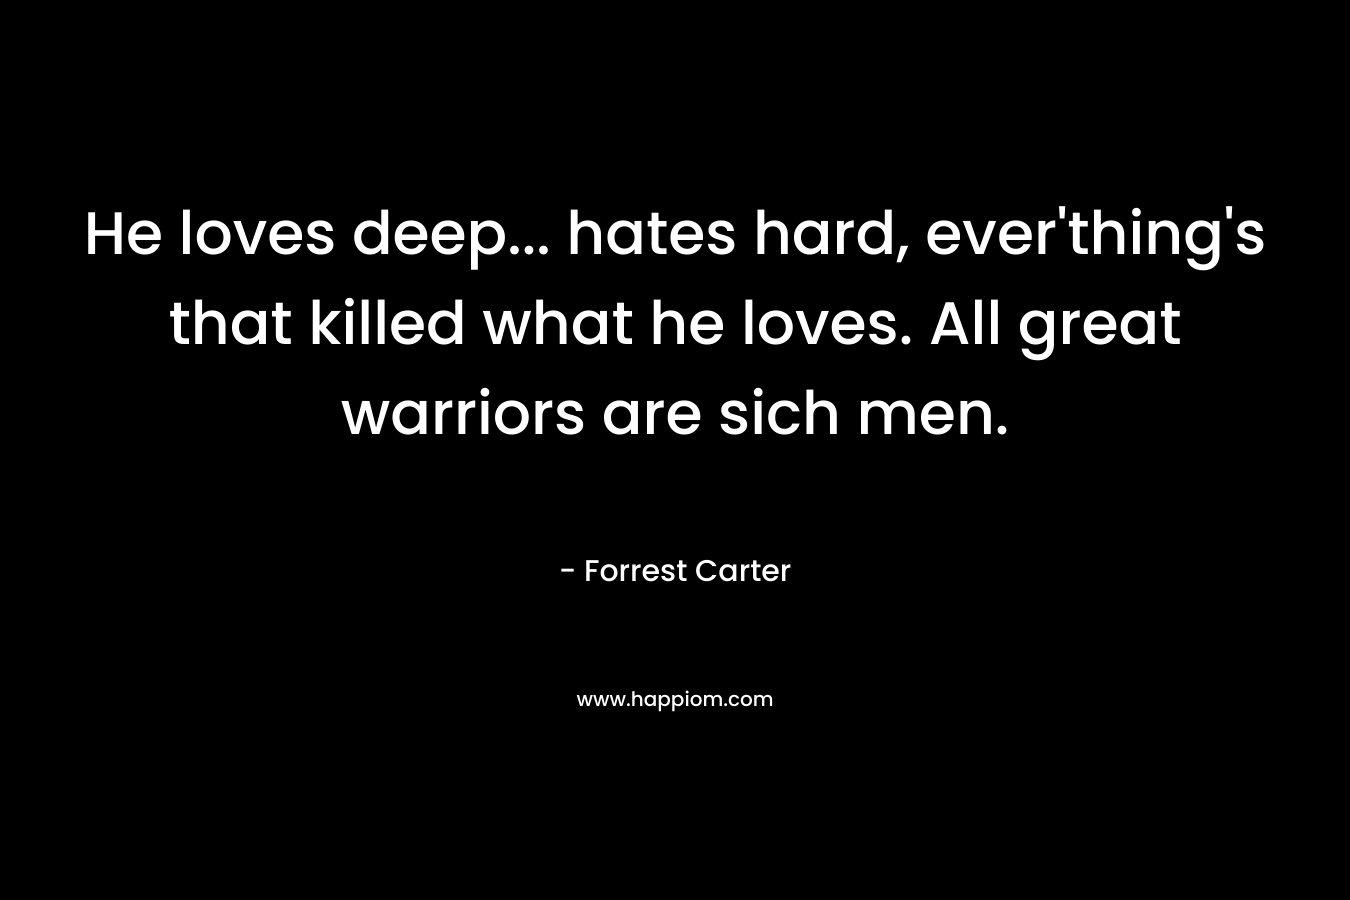 He loves deep... hates hard, ever'thing's that killed what he loves. All great warriors are sich men.